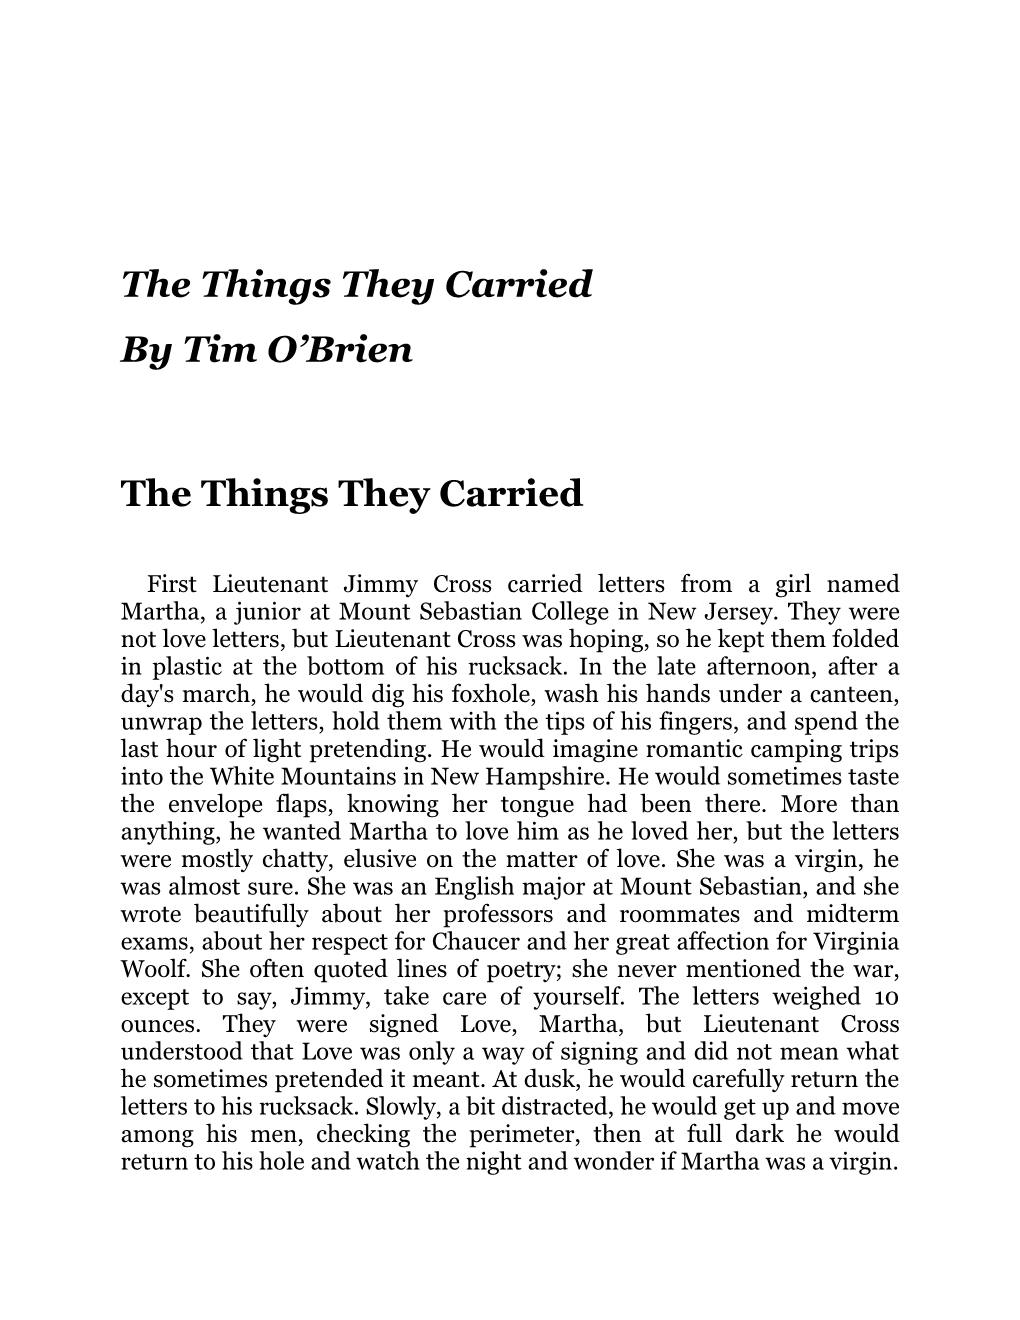 Tim O'brien - The Things They Carried